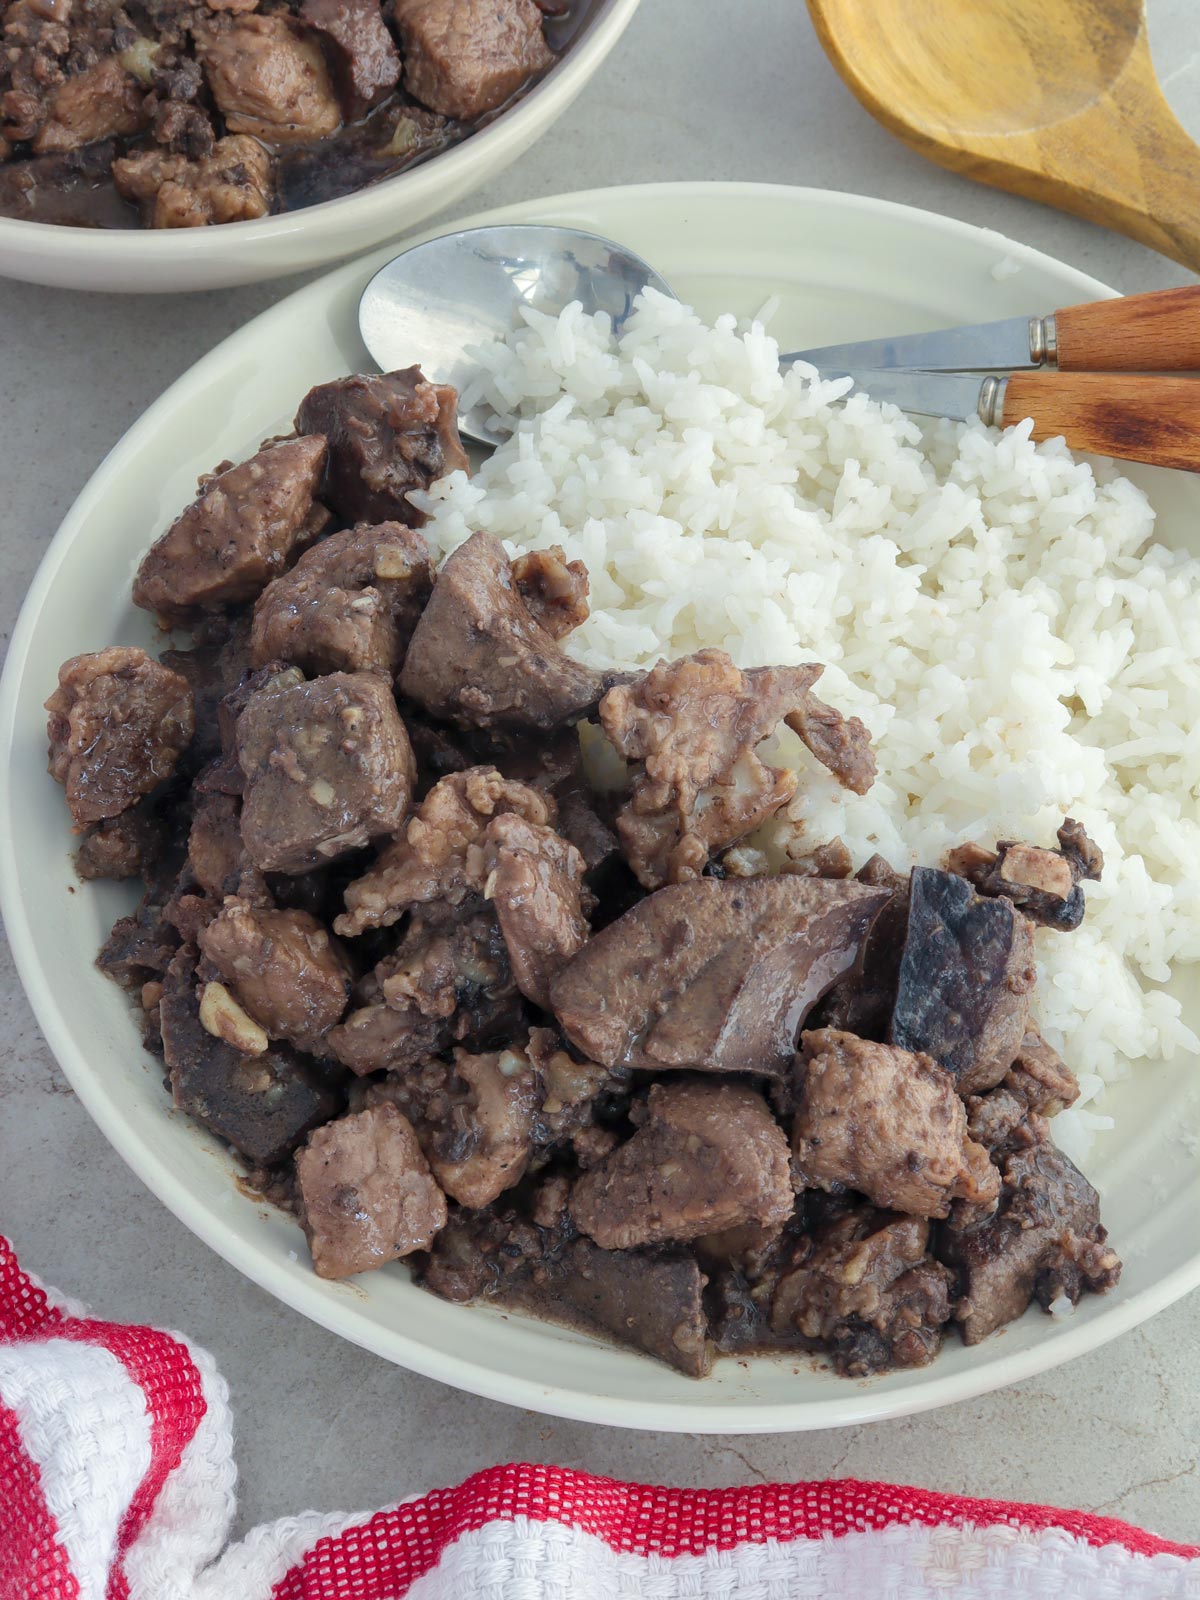 Kapampangan pork and liver stew on a white plate with steamed rice